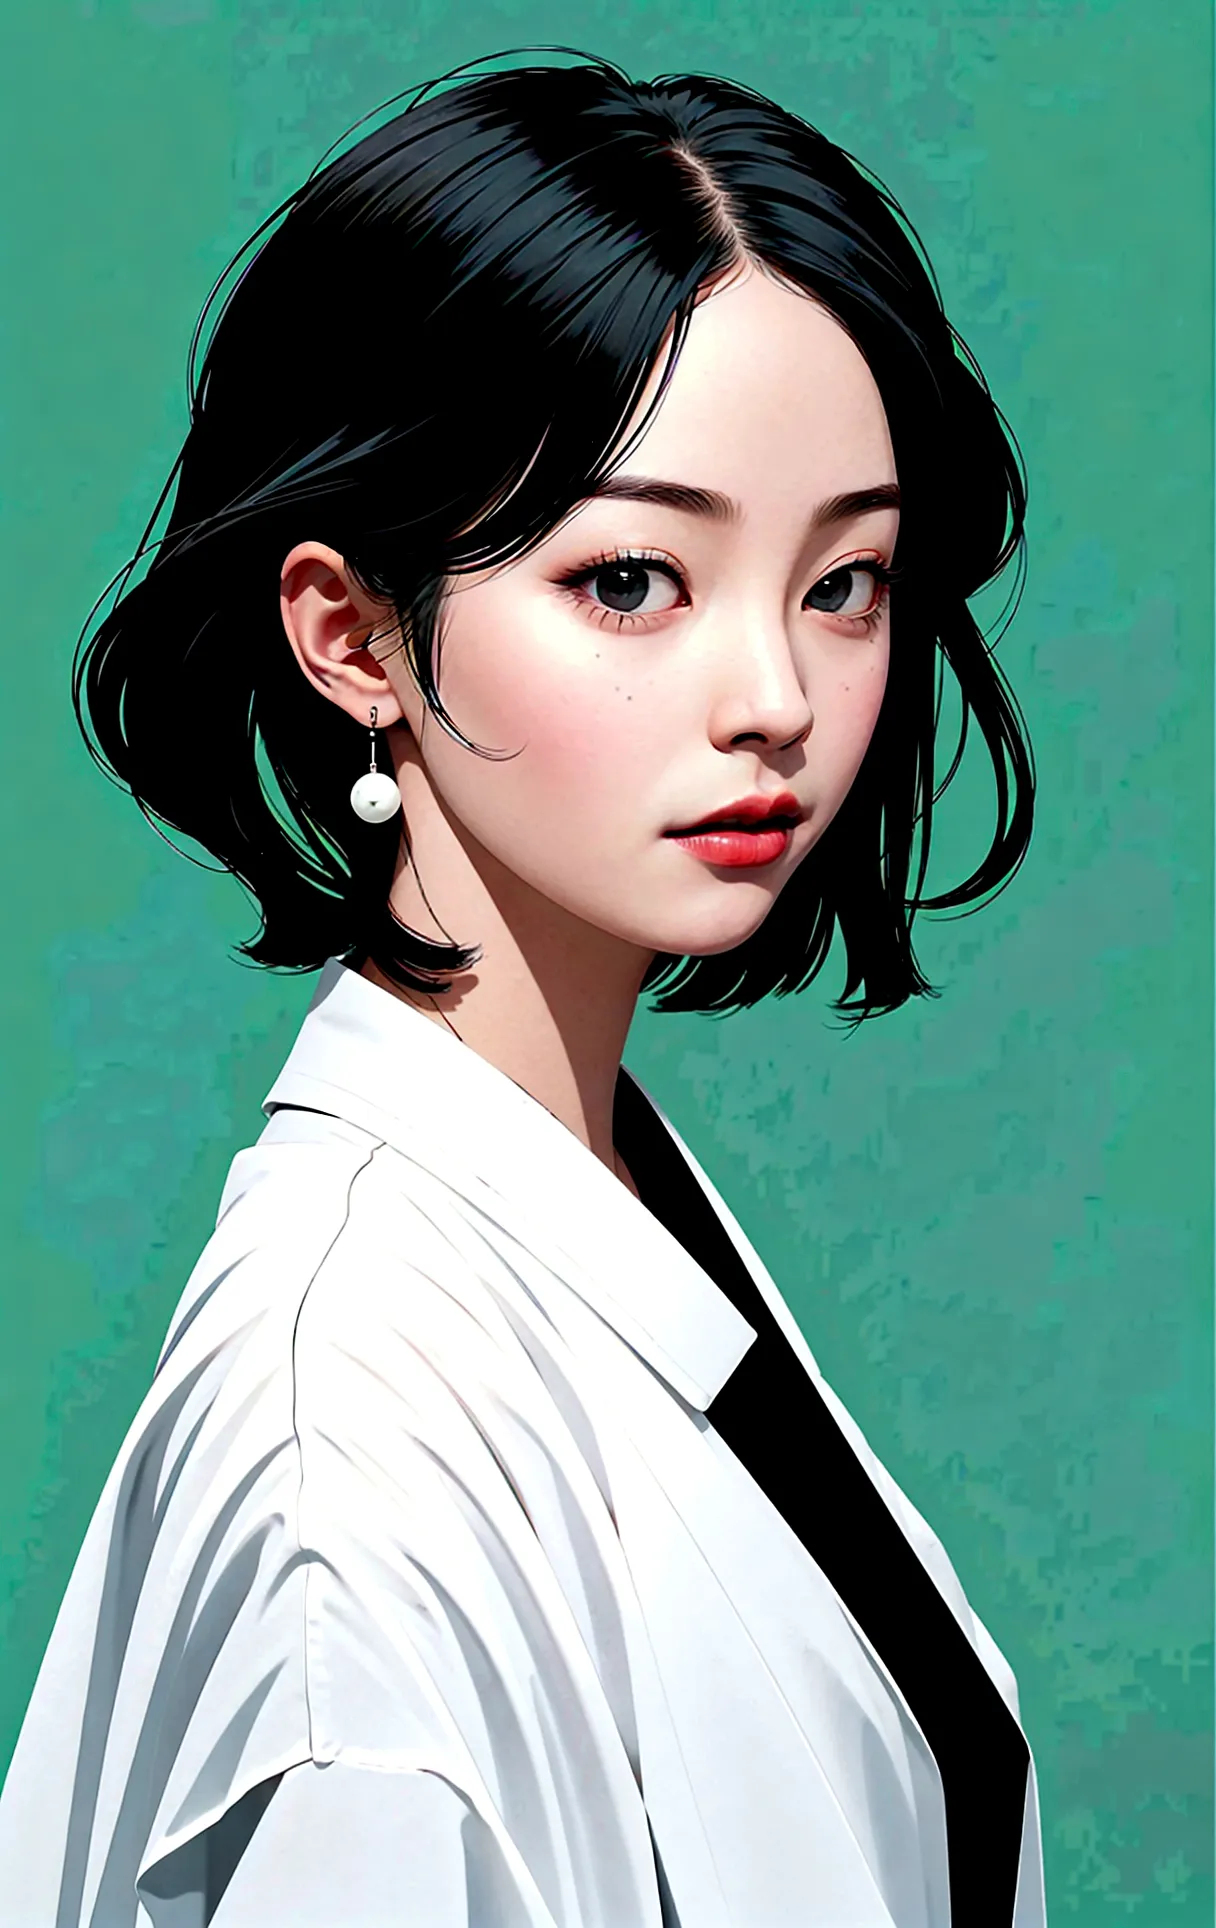 
chinese goddess sexy, Pretty face, Delicious company, Seductive figure, Wear a sexy hanfu dress. The artwork is created in a me...